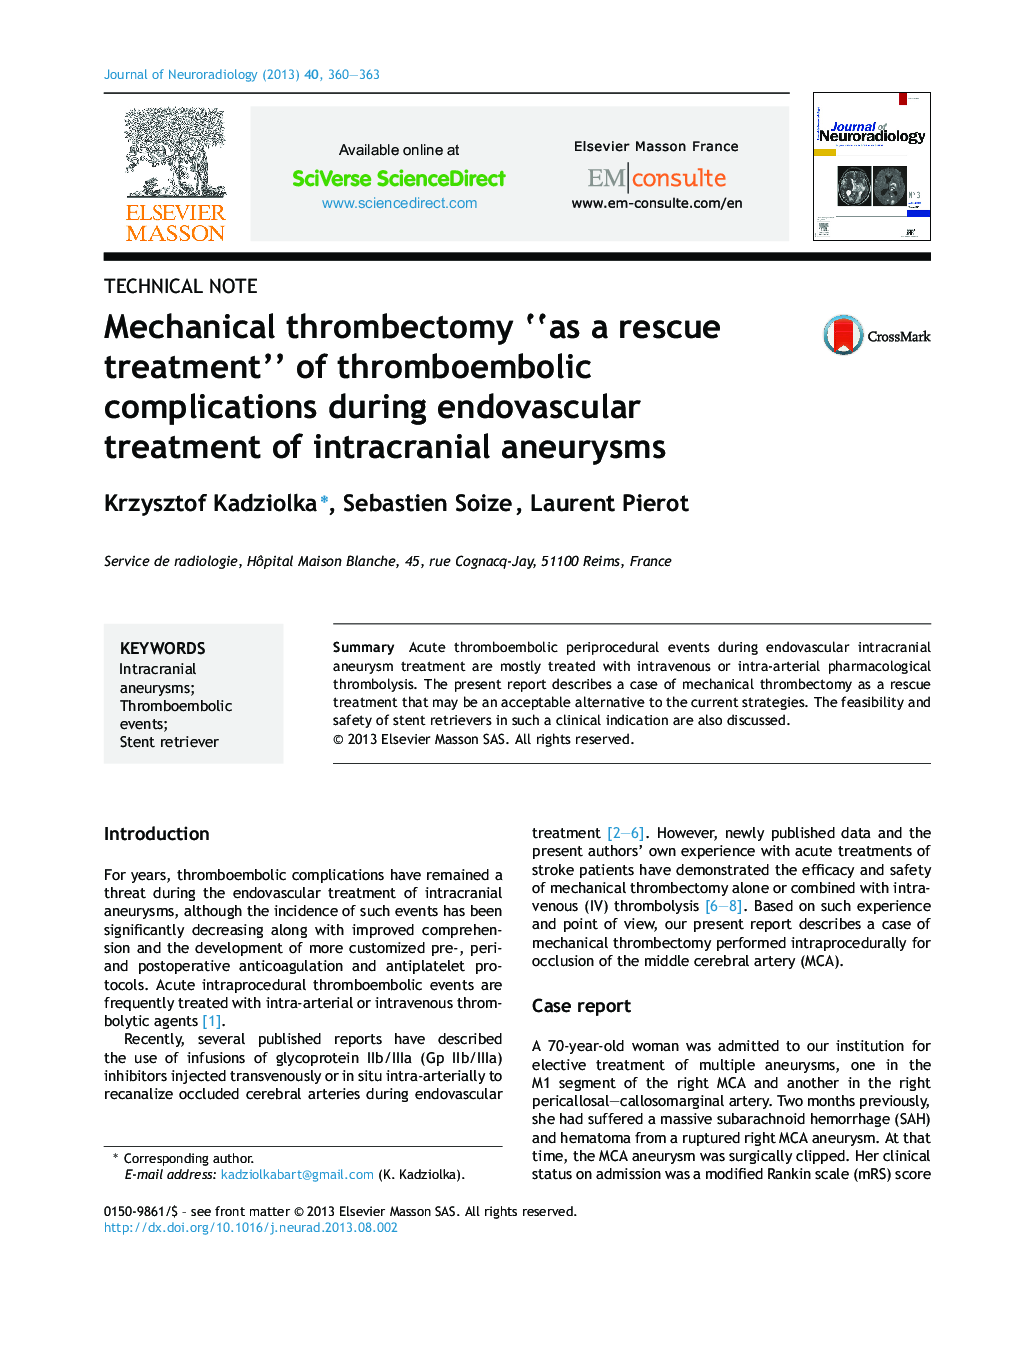 Mechanical thrombectomy “as a rescue treatment” of thromboembolic complications during endovascular treatment of intracranial aneurysms